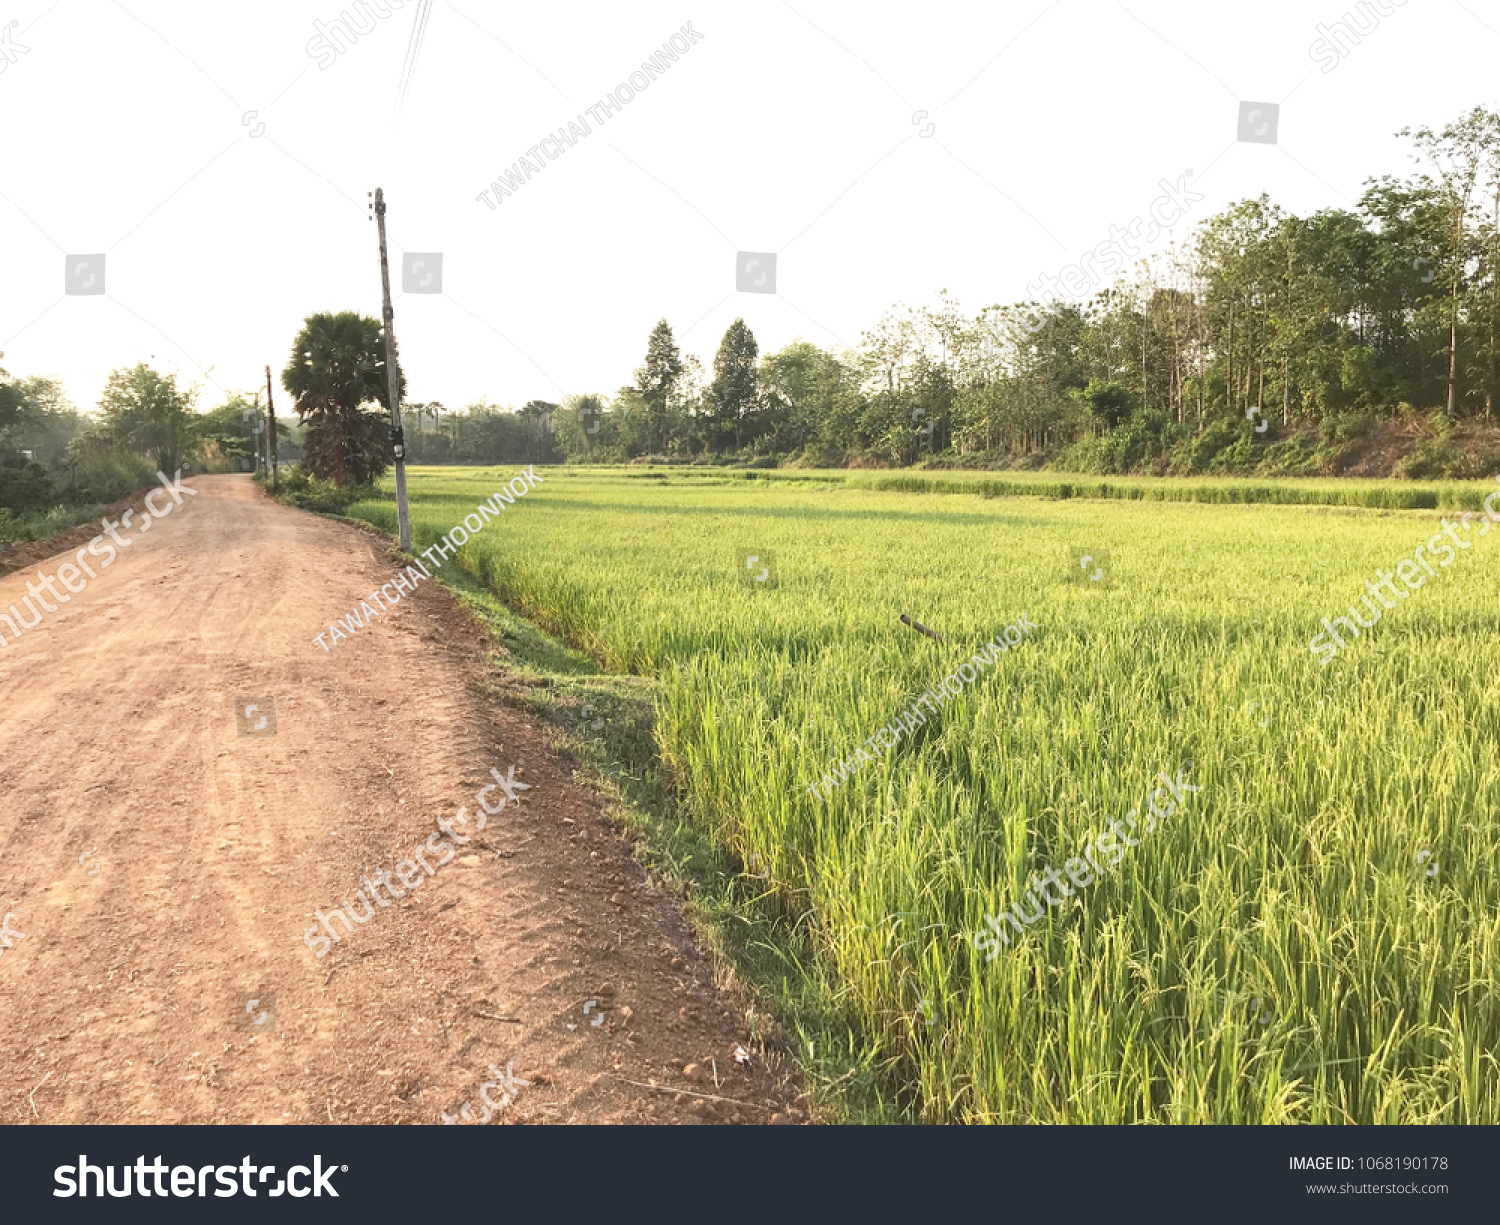 Green field And yellow of rice. The side of the road is a dusty natural landmark that is the landmark of the province. A tourist attraction It is a tourist business. #1068190178